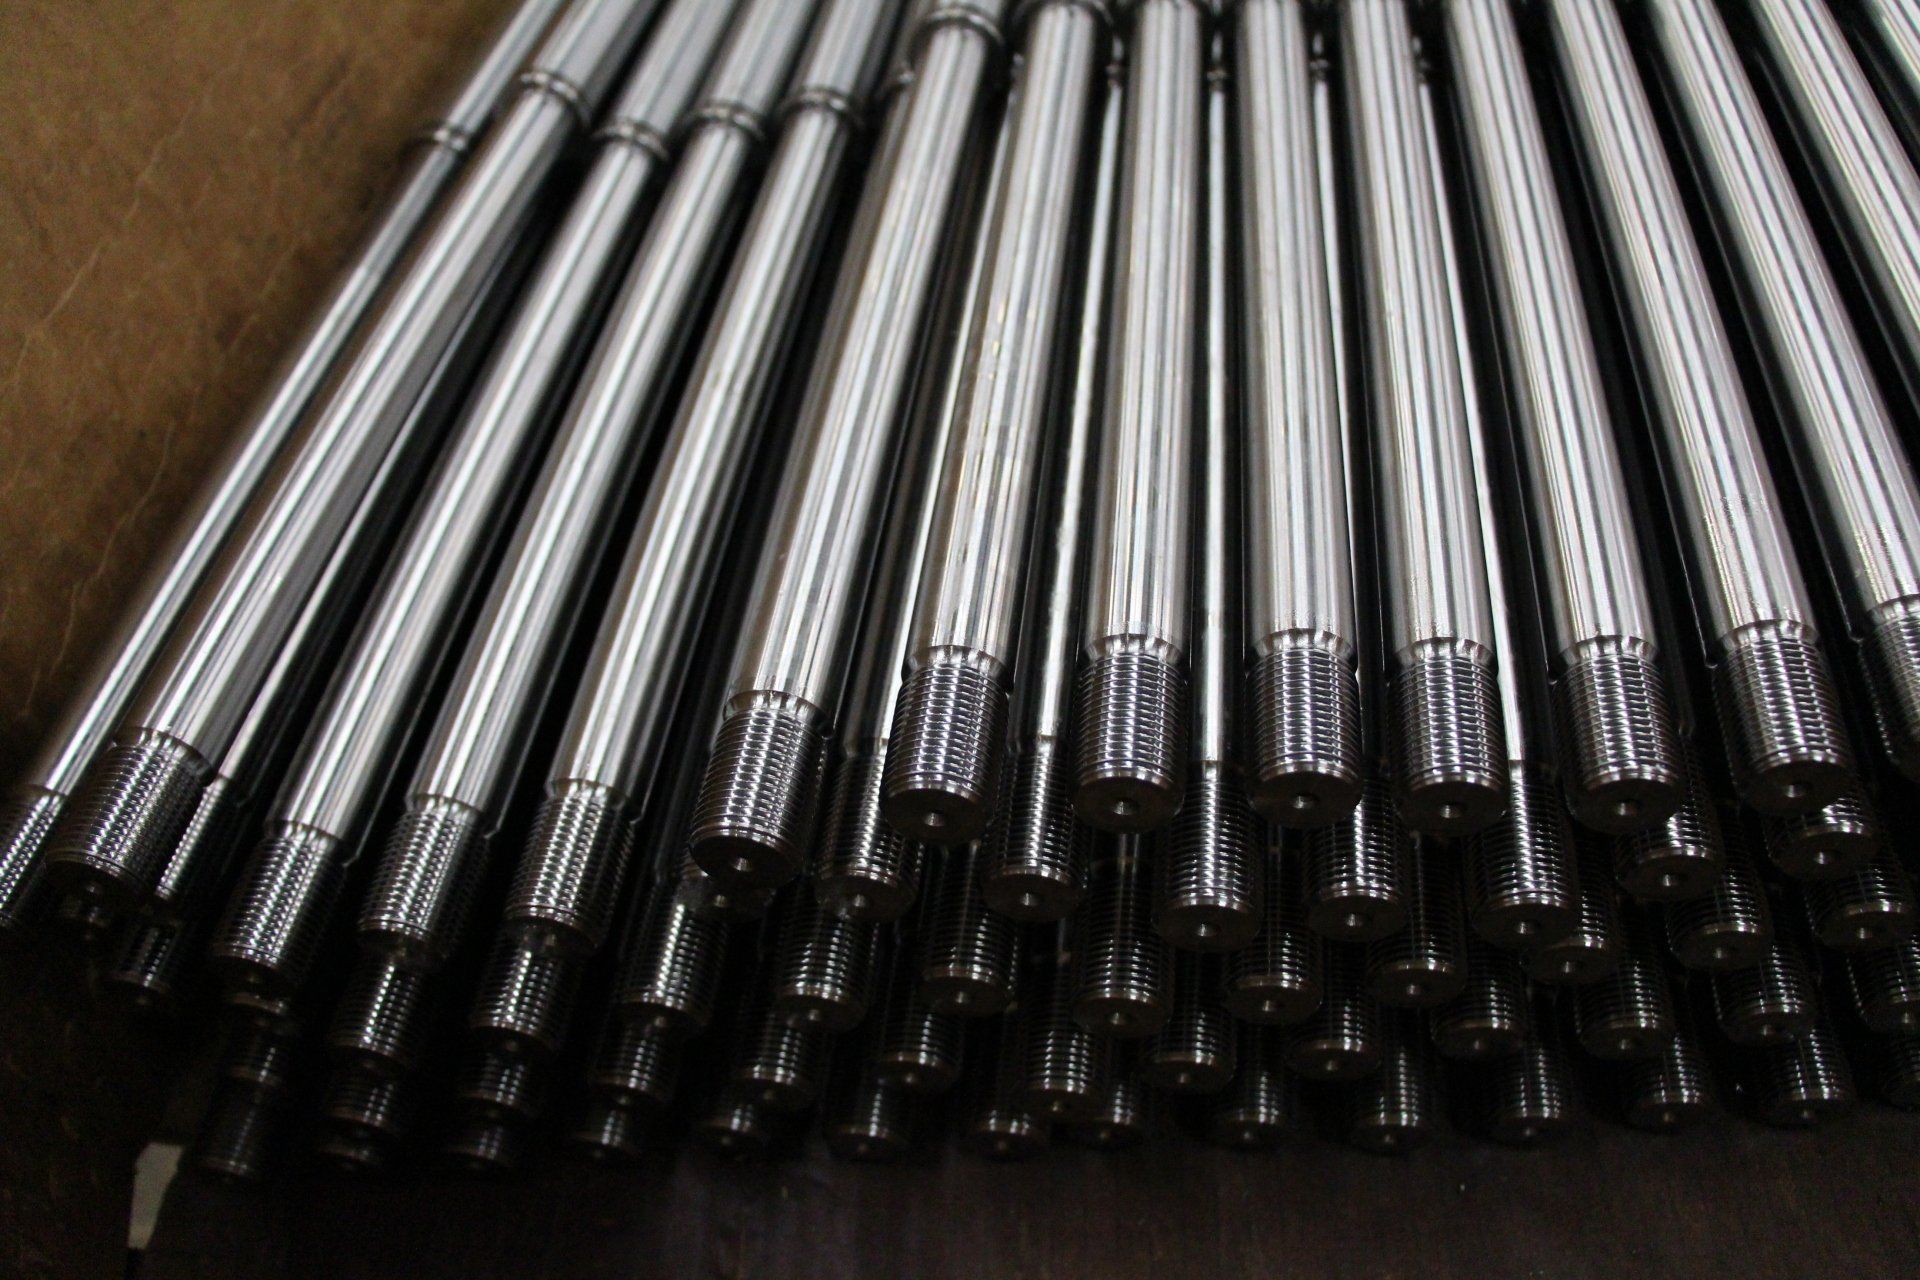 Close-up of finished threaded bars ready for shipping